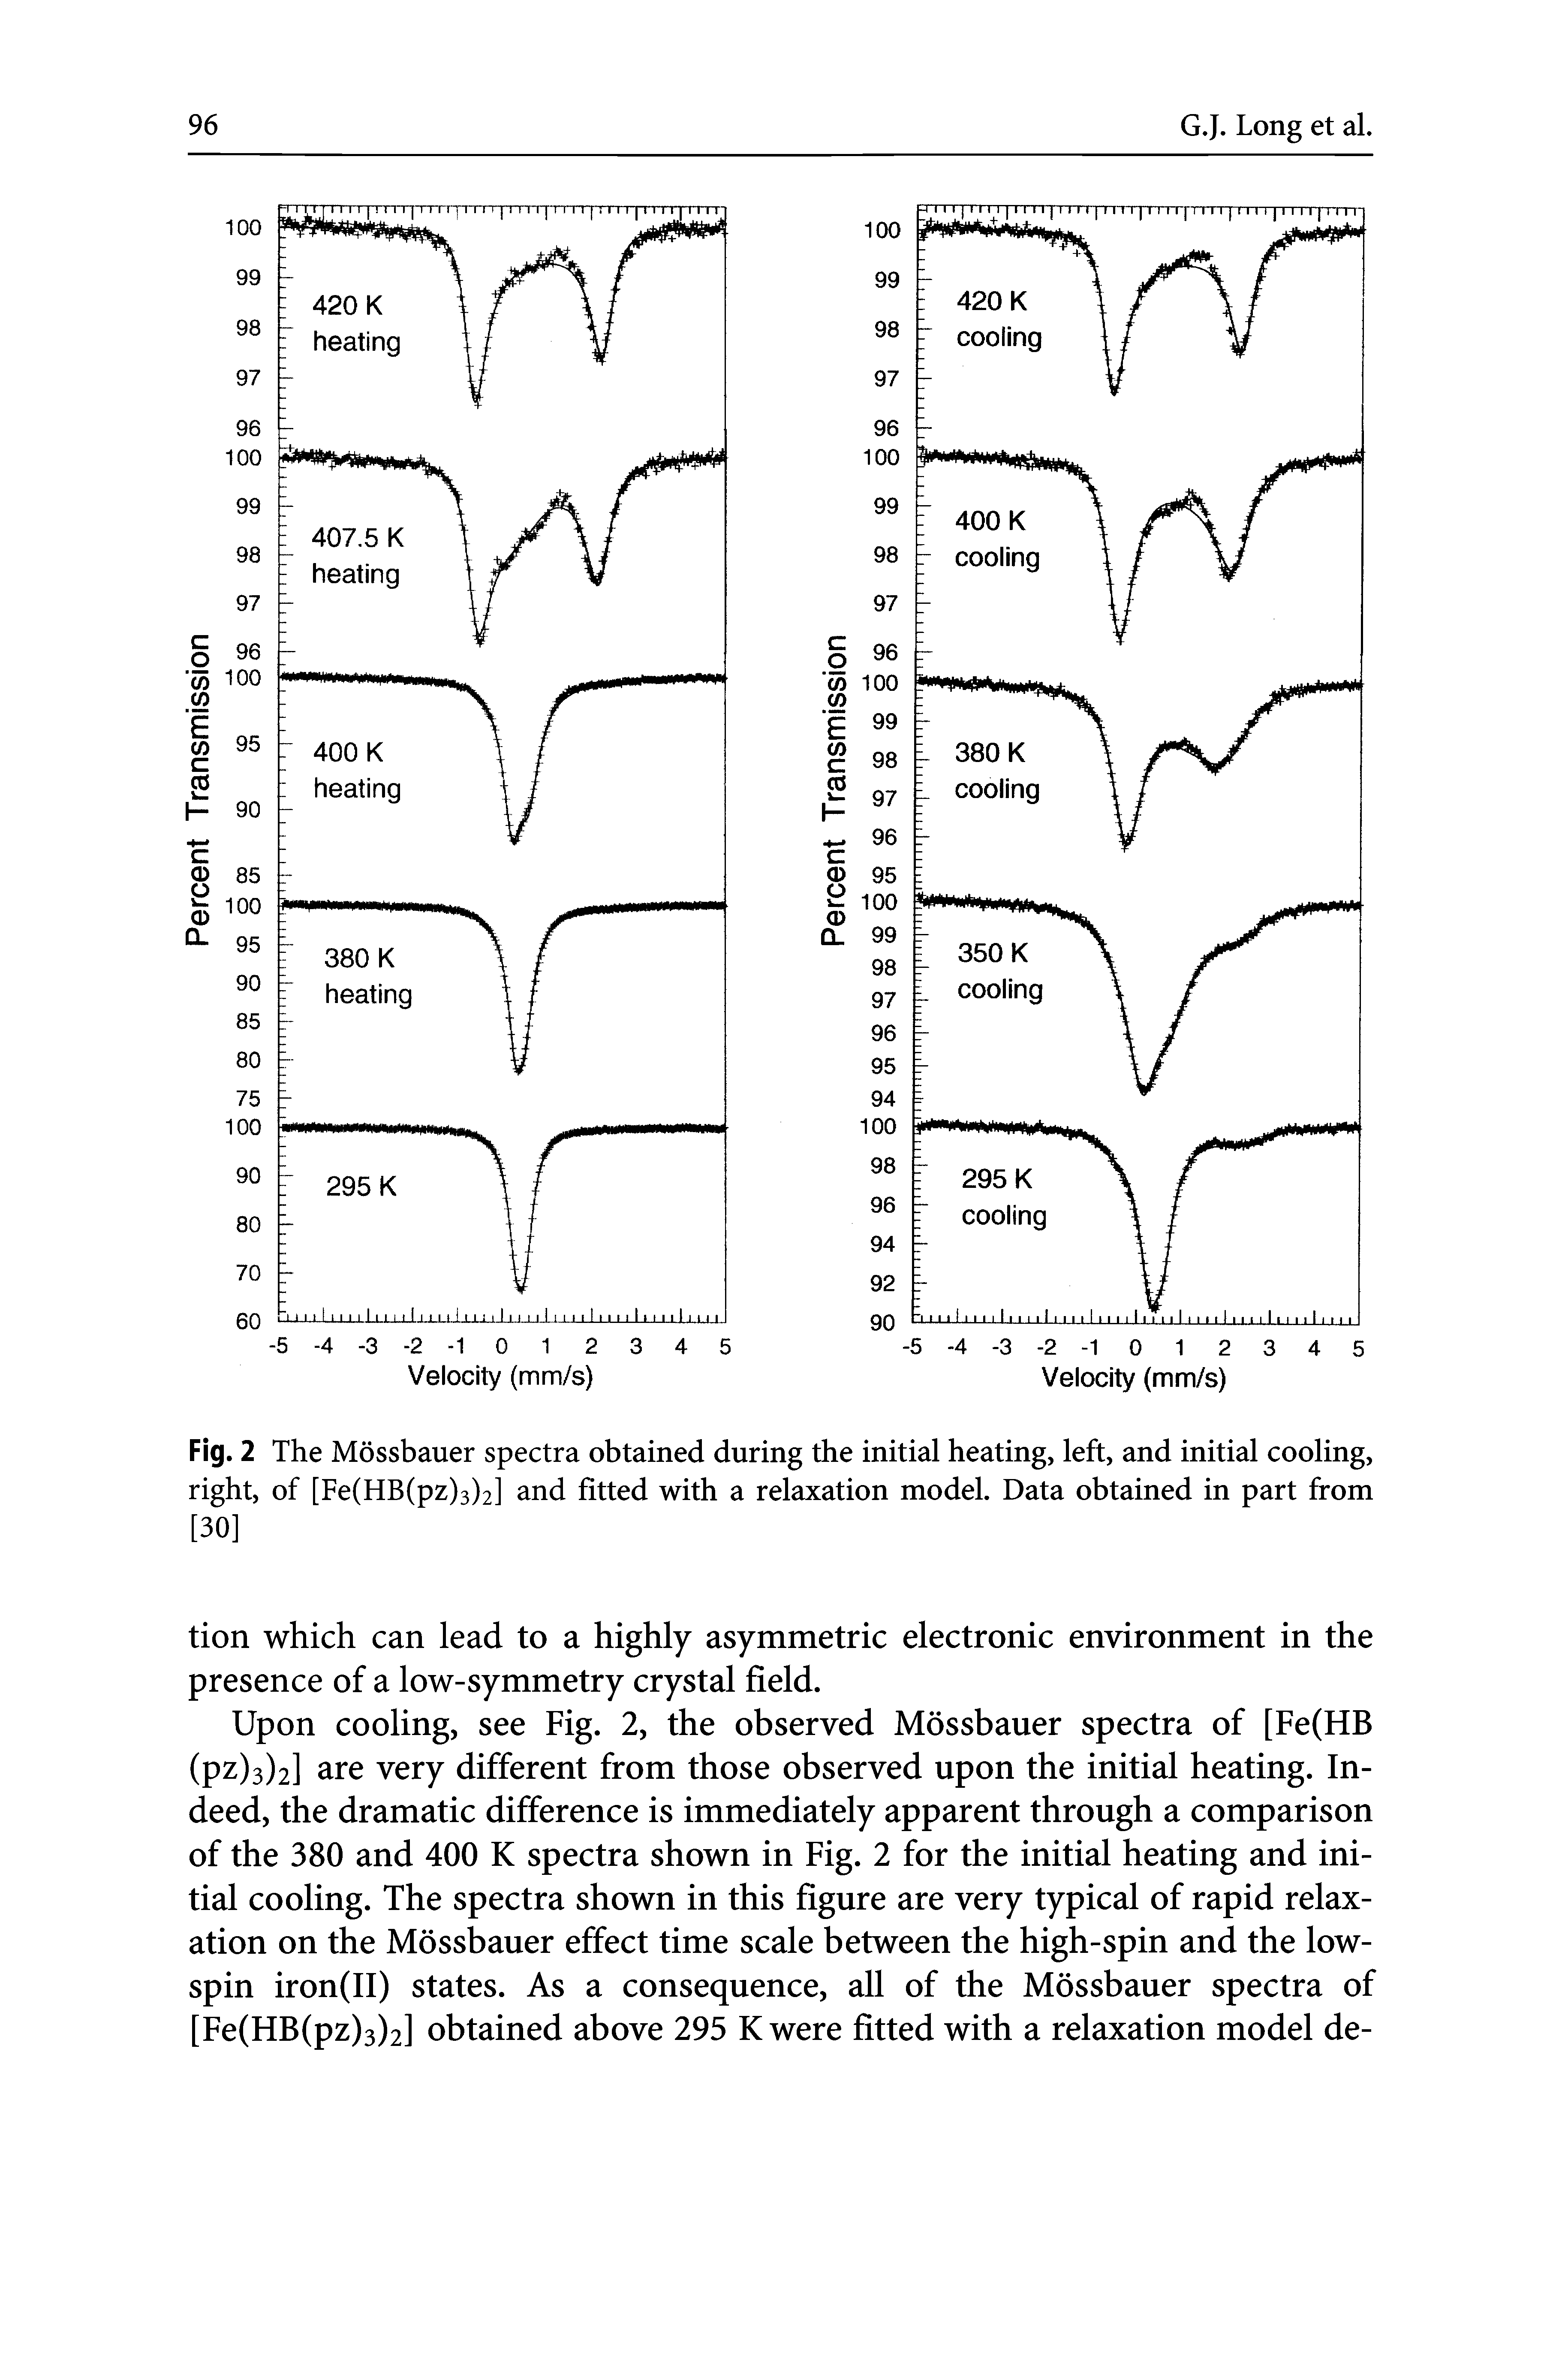 Fig. 2 The Mossbauer spectra obtained during the initial heating, left, and initial cooling, right, of [Fe(HB(pz)3)2] and fitted with a relaxation model. Data obtained in part from [30]...